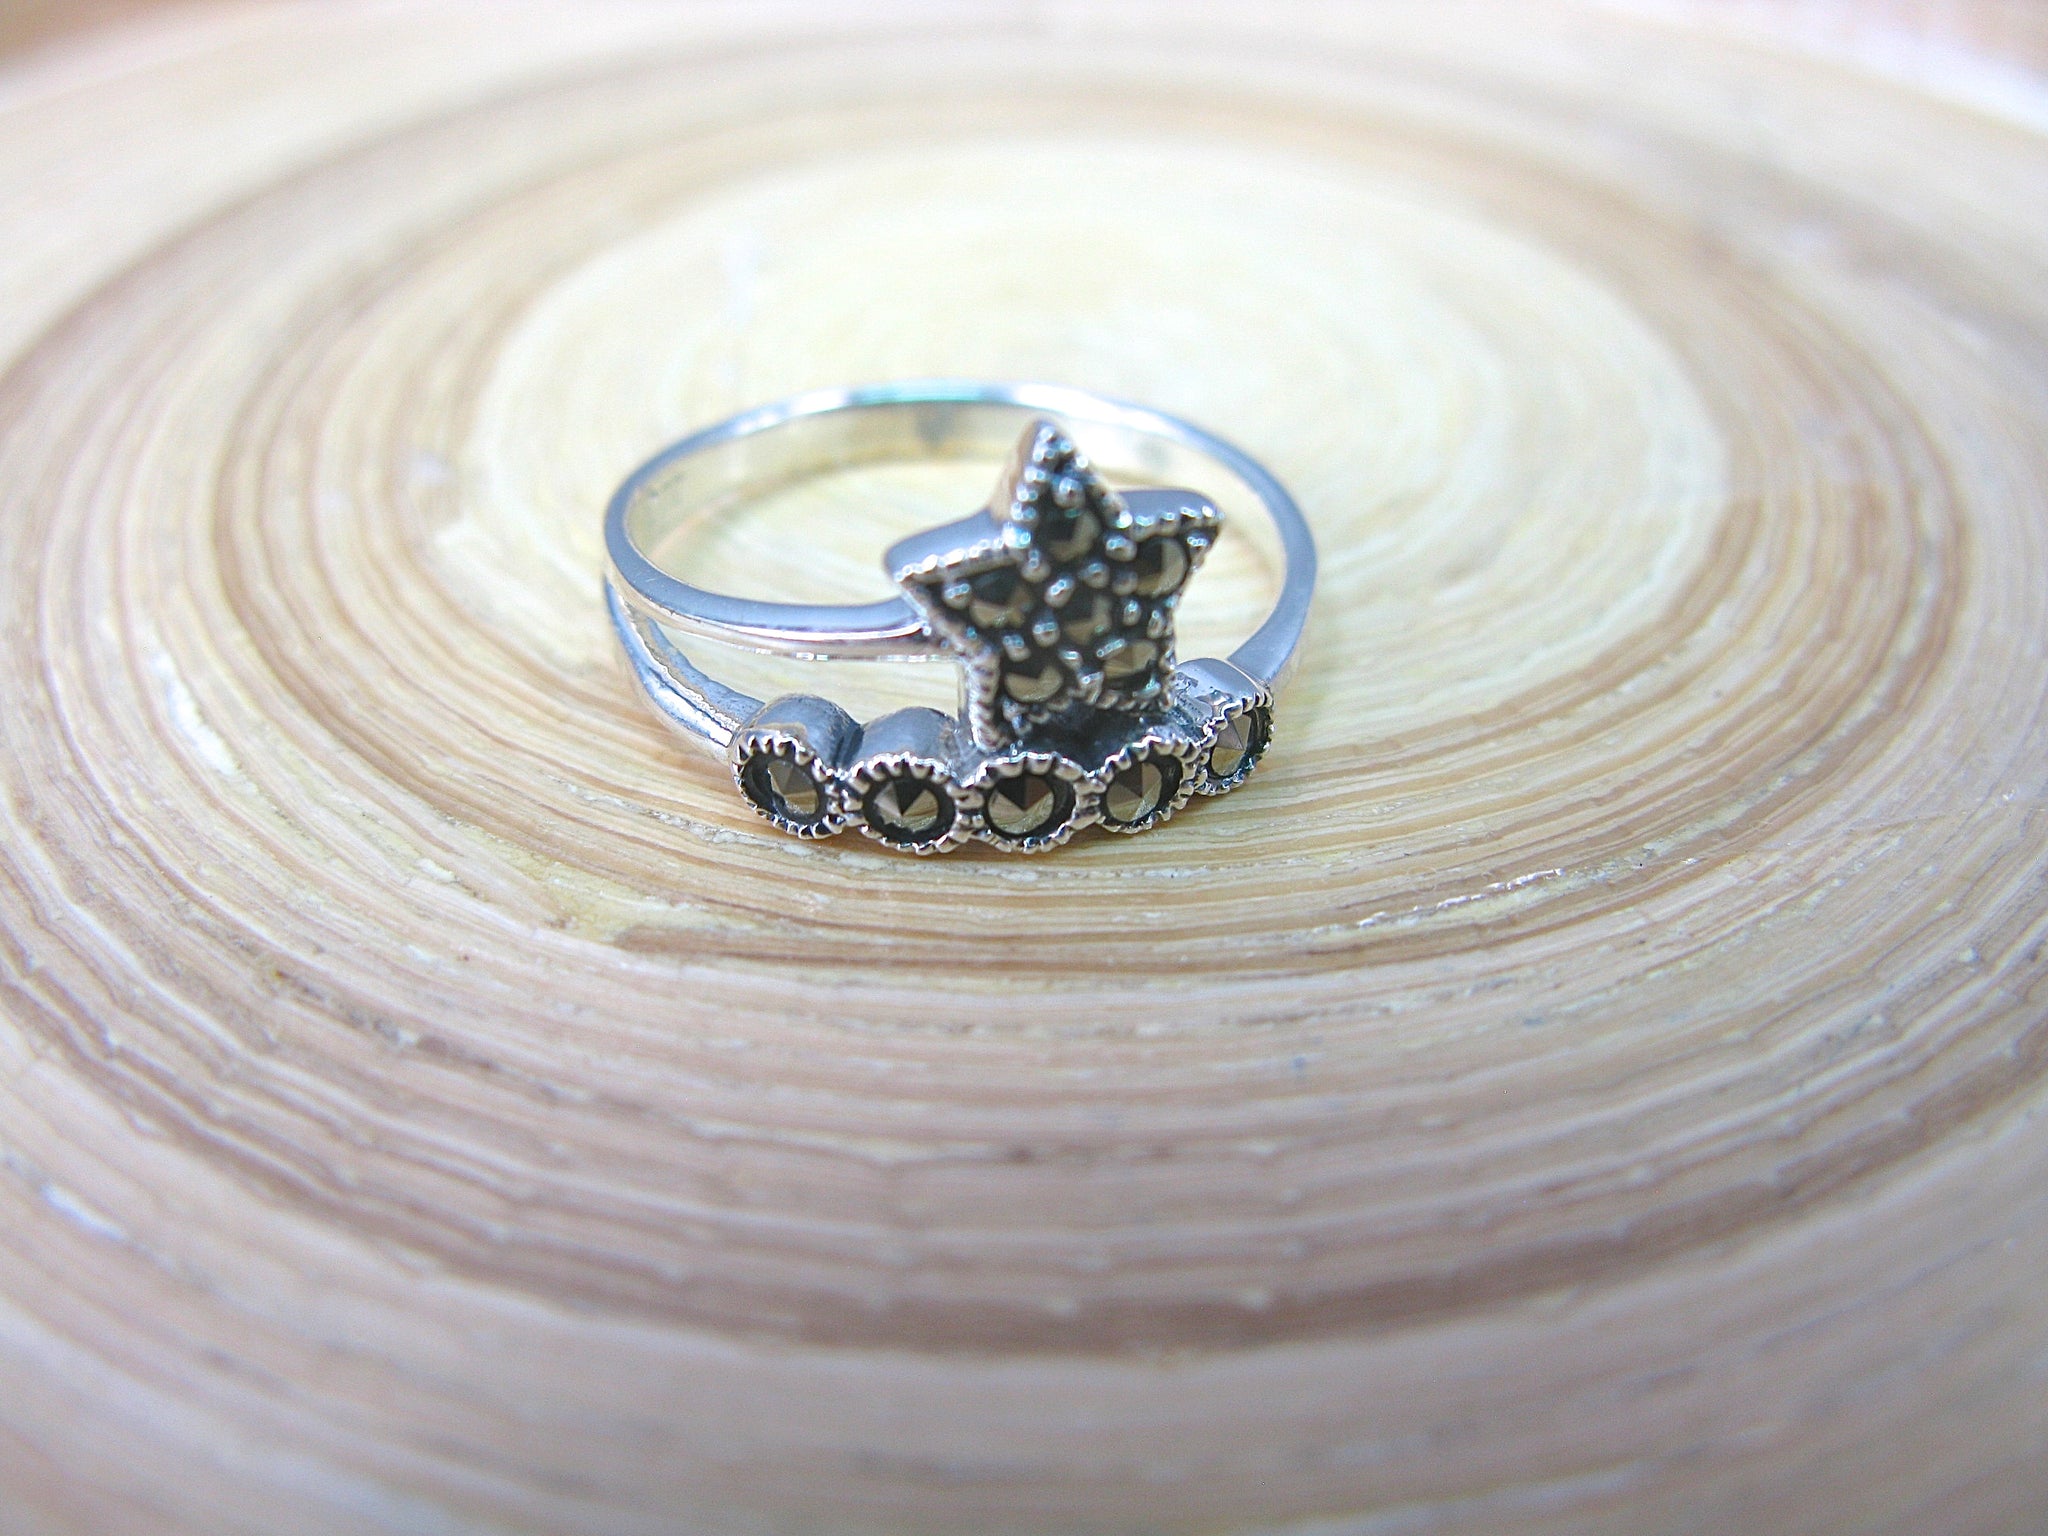 Star Marcasite Ring in 925 Sterling Silver